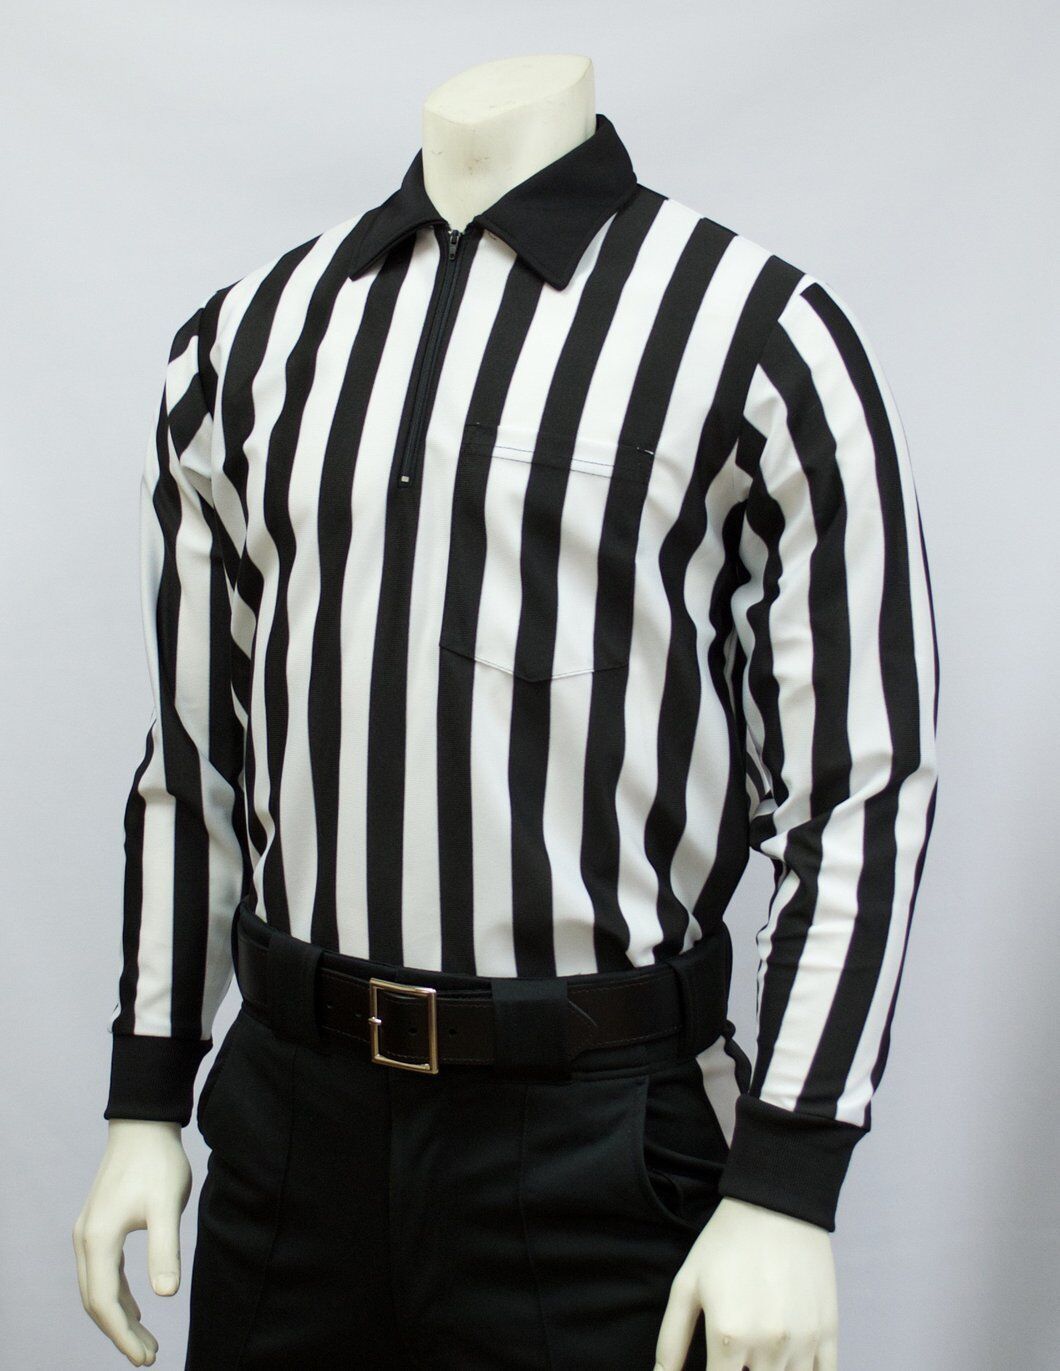 SMITTY | FBS-113 | HEAVY FABRIC Referee Officials Long Sleeve Football Lacrosse - $47.99